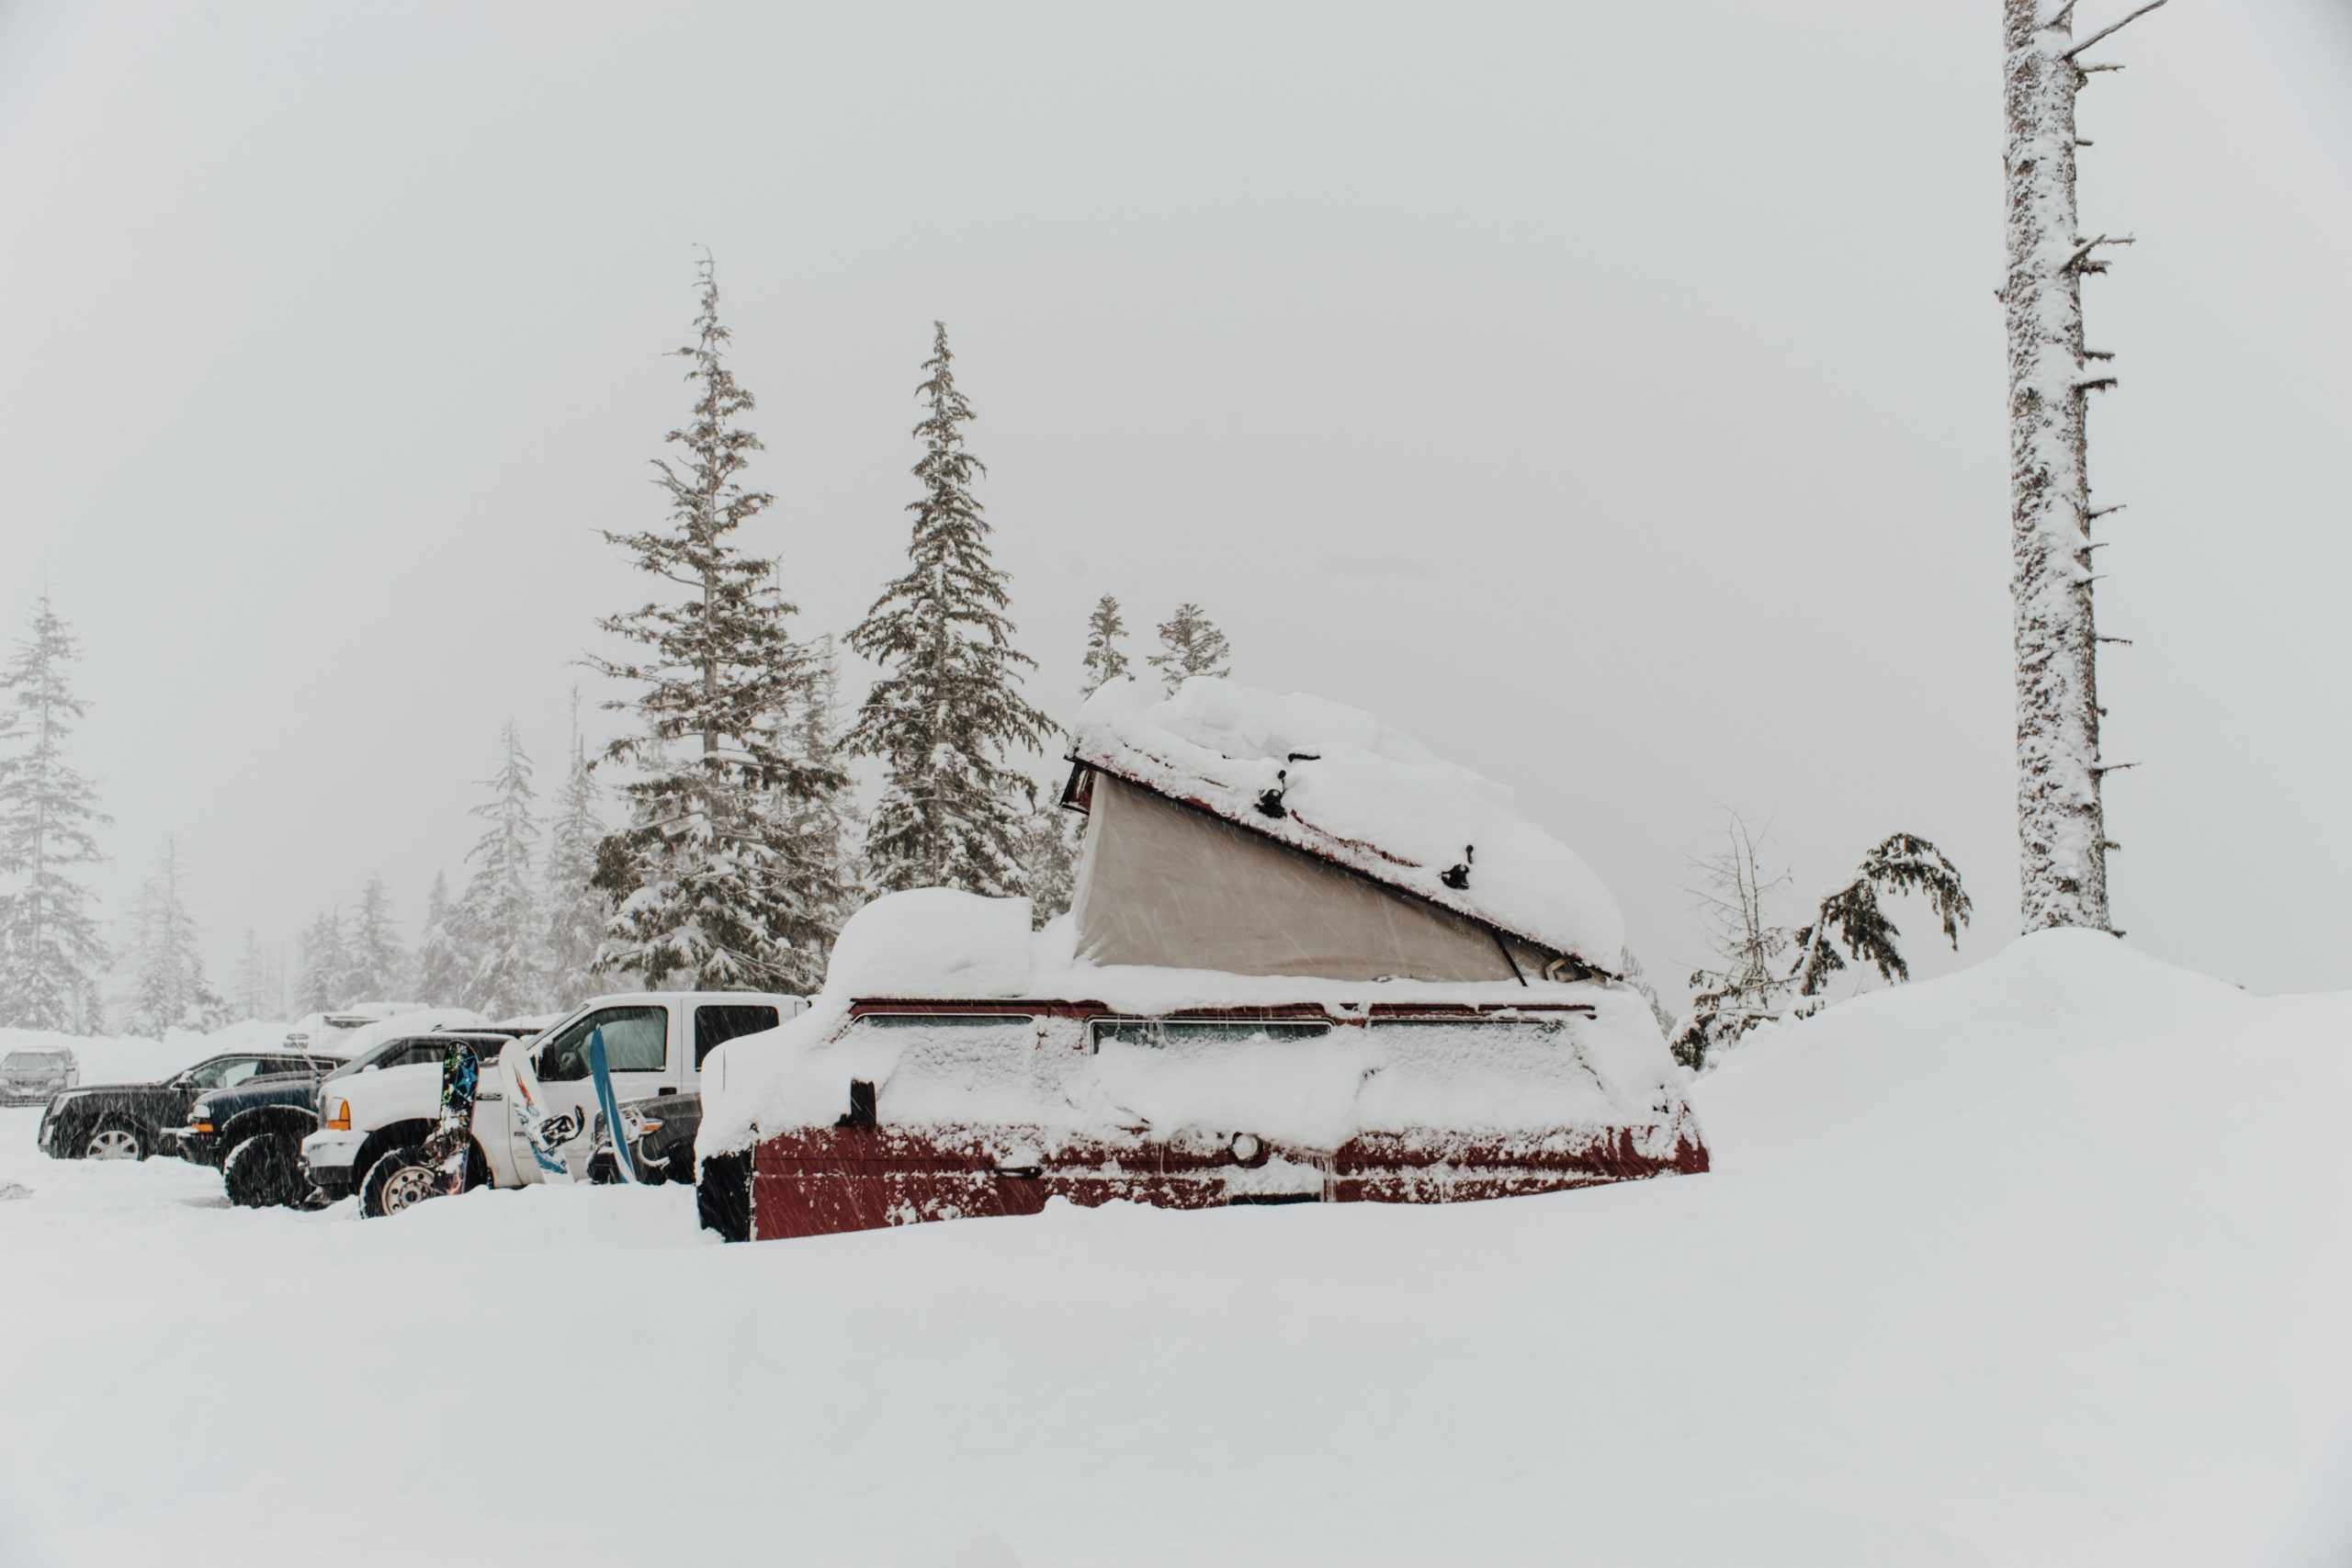 Winter RV camping: A guide for cold weather campers